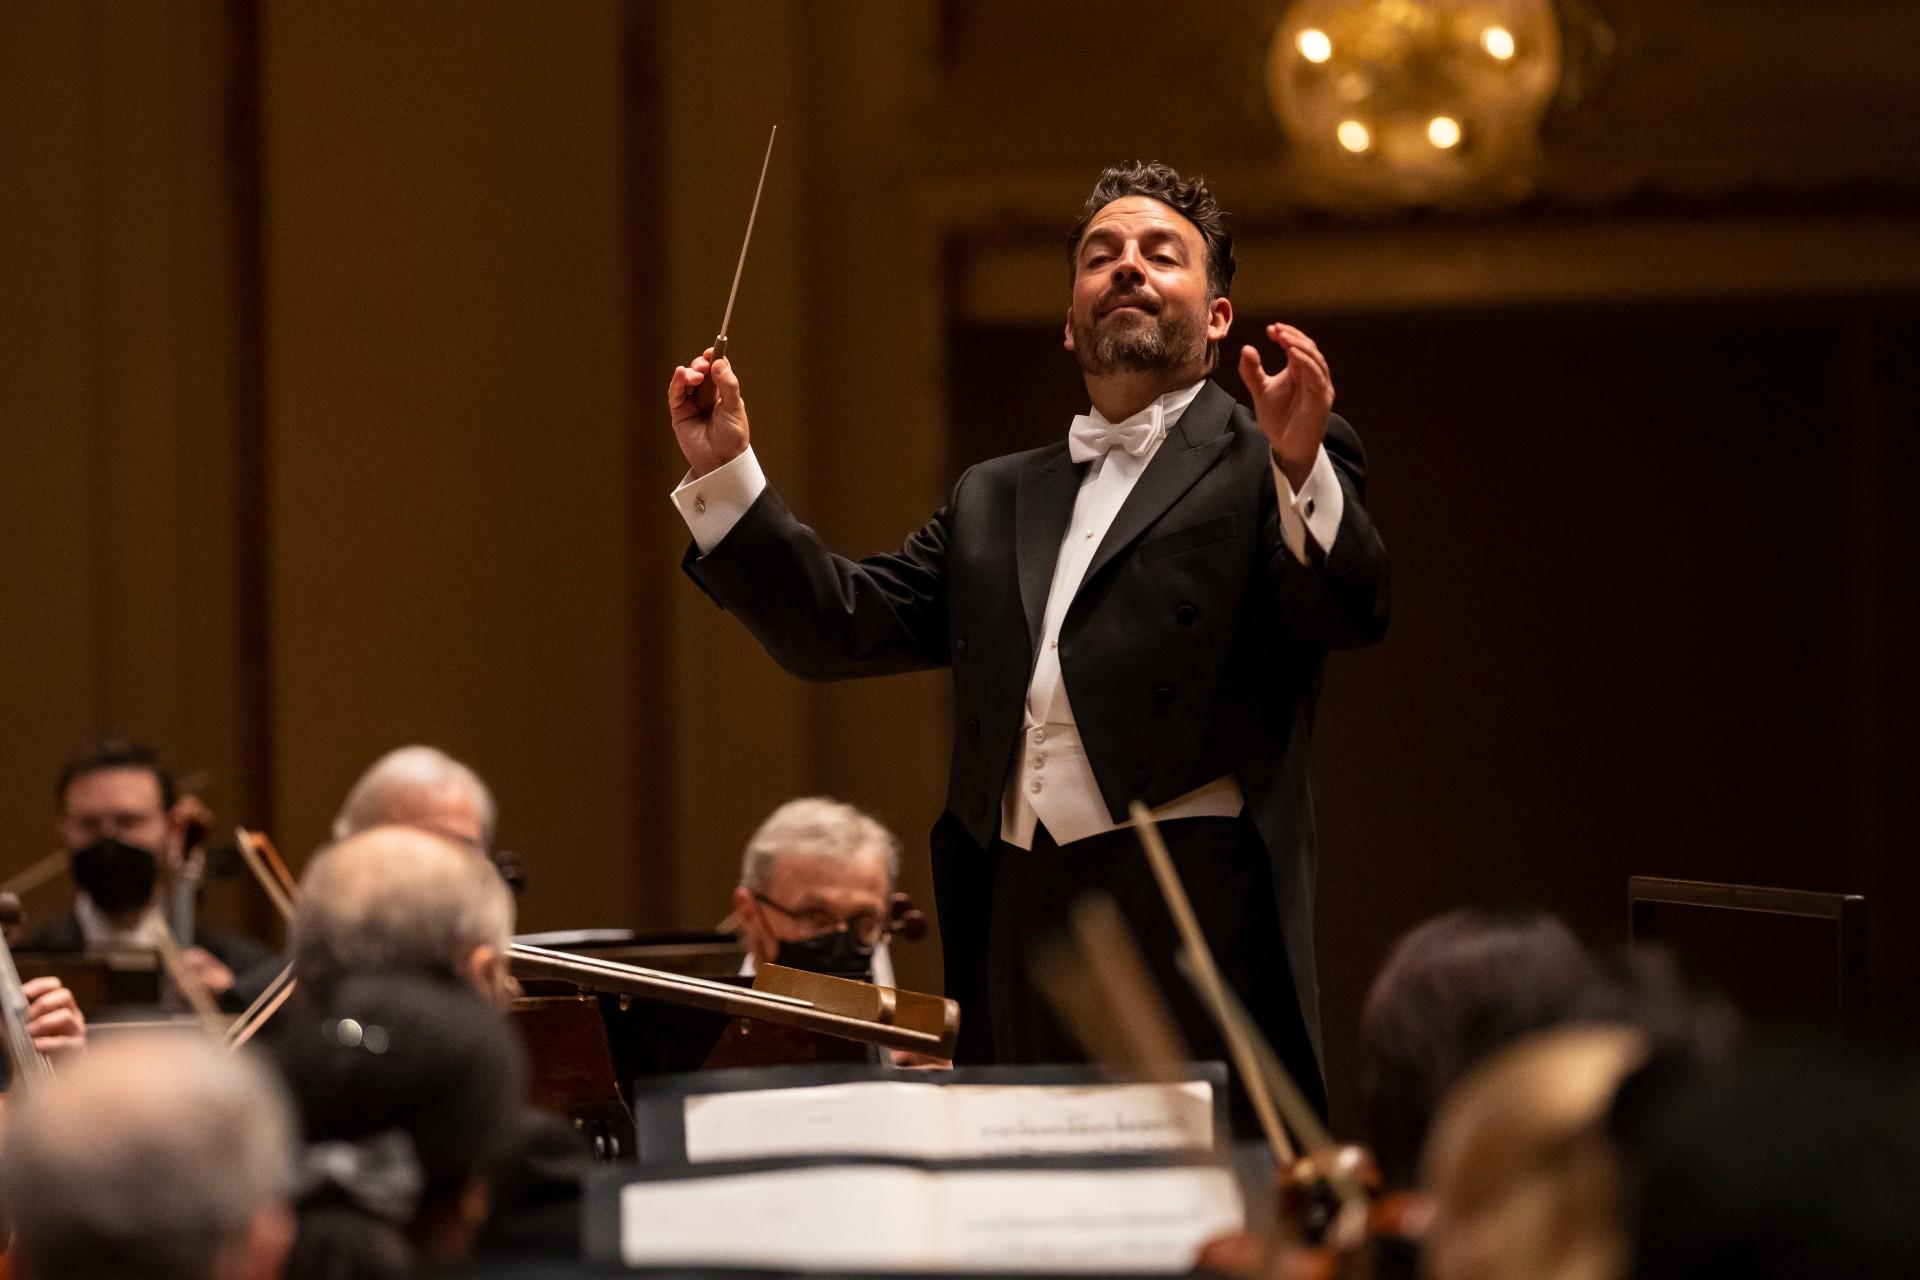 Conductor James Gaffigan leads the Chicago Symphony Orchestra in a program with works by Saint-Saëns, Saint-Saëns Mussorgsky (Orch. Rimsky-Korsakov), and Tchaikovsky. (Photo Credit: Todd Rosenberg)